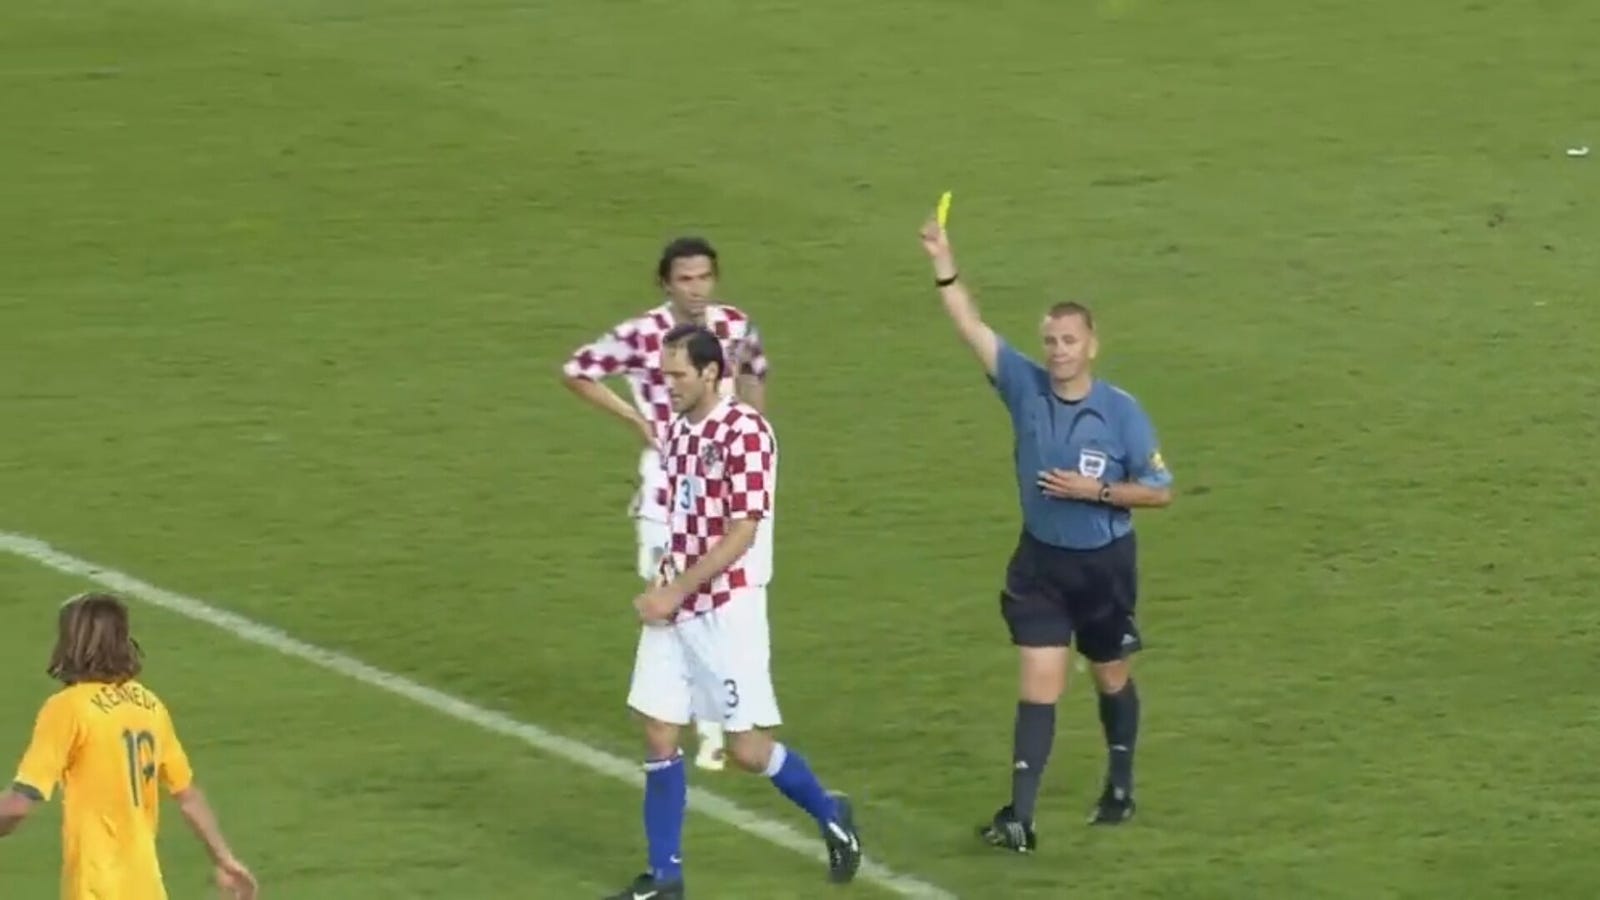 One, two, three yellow cards